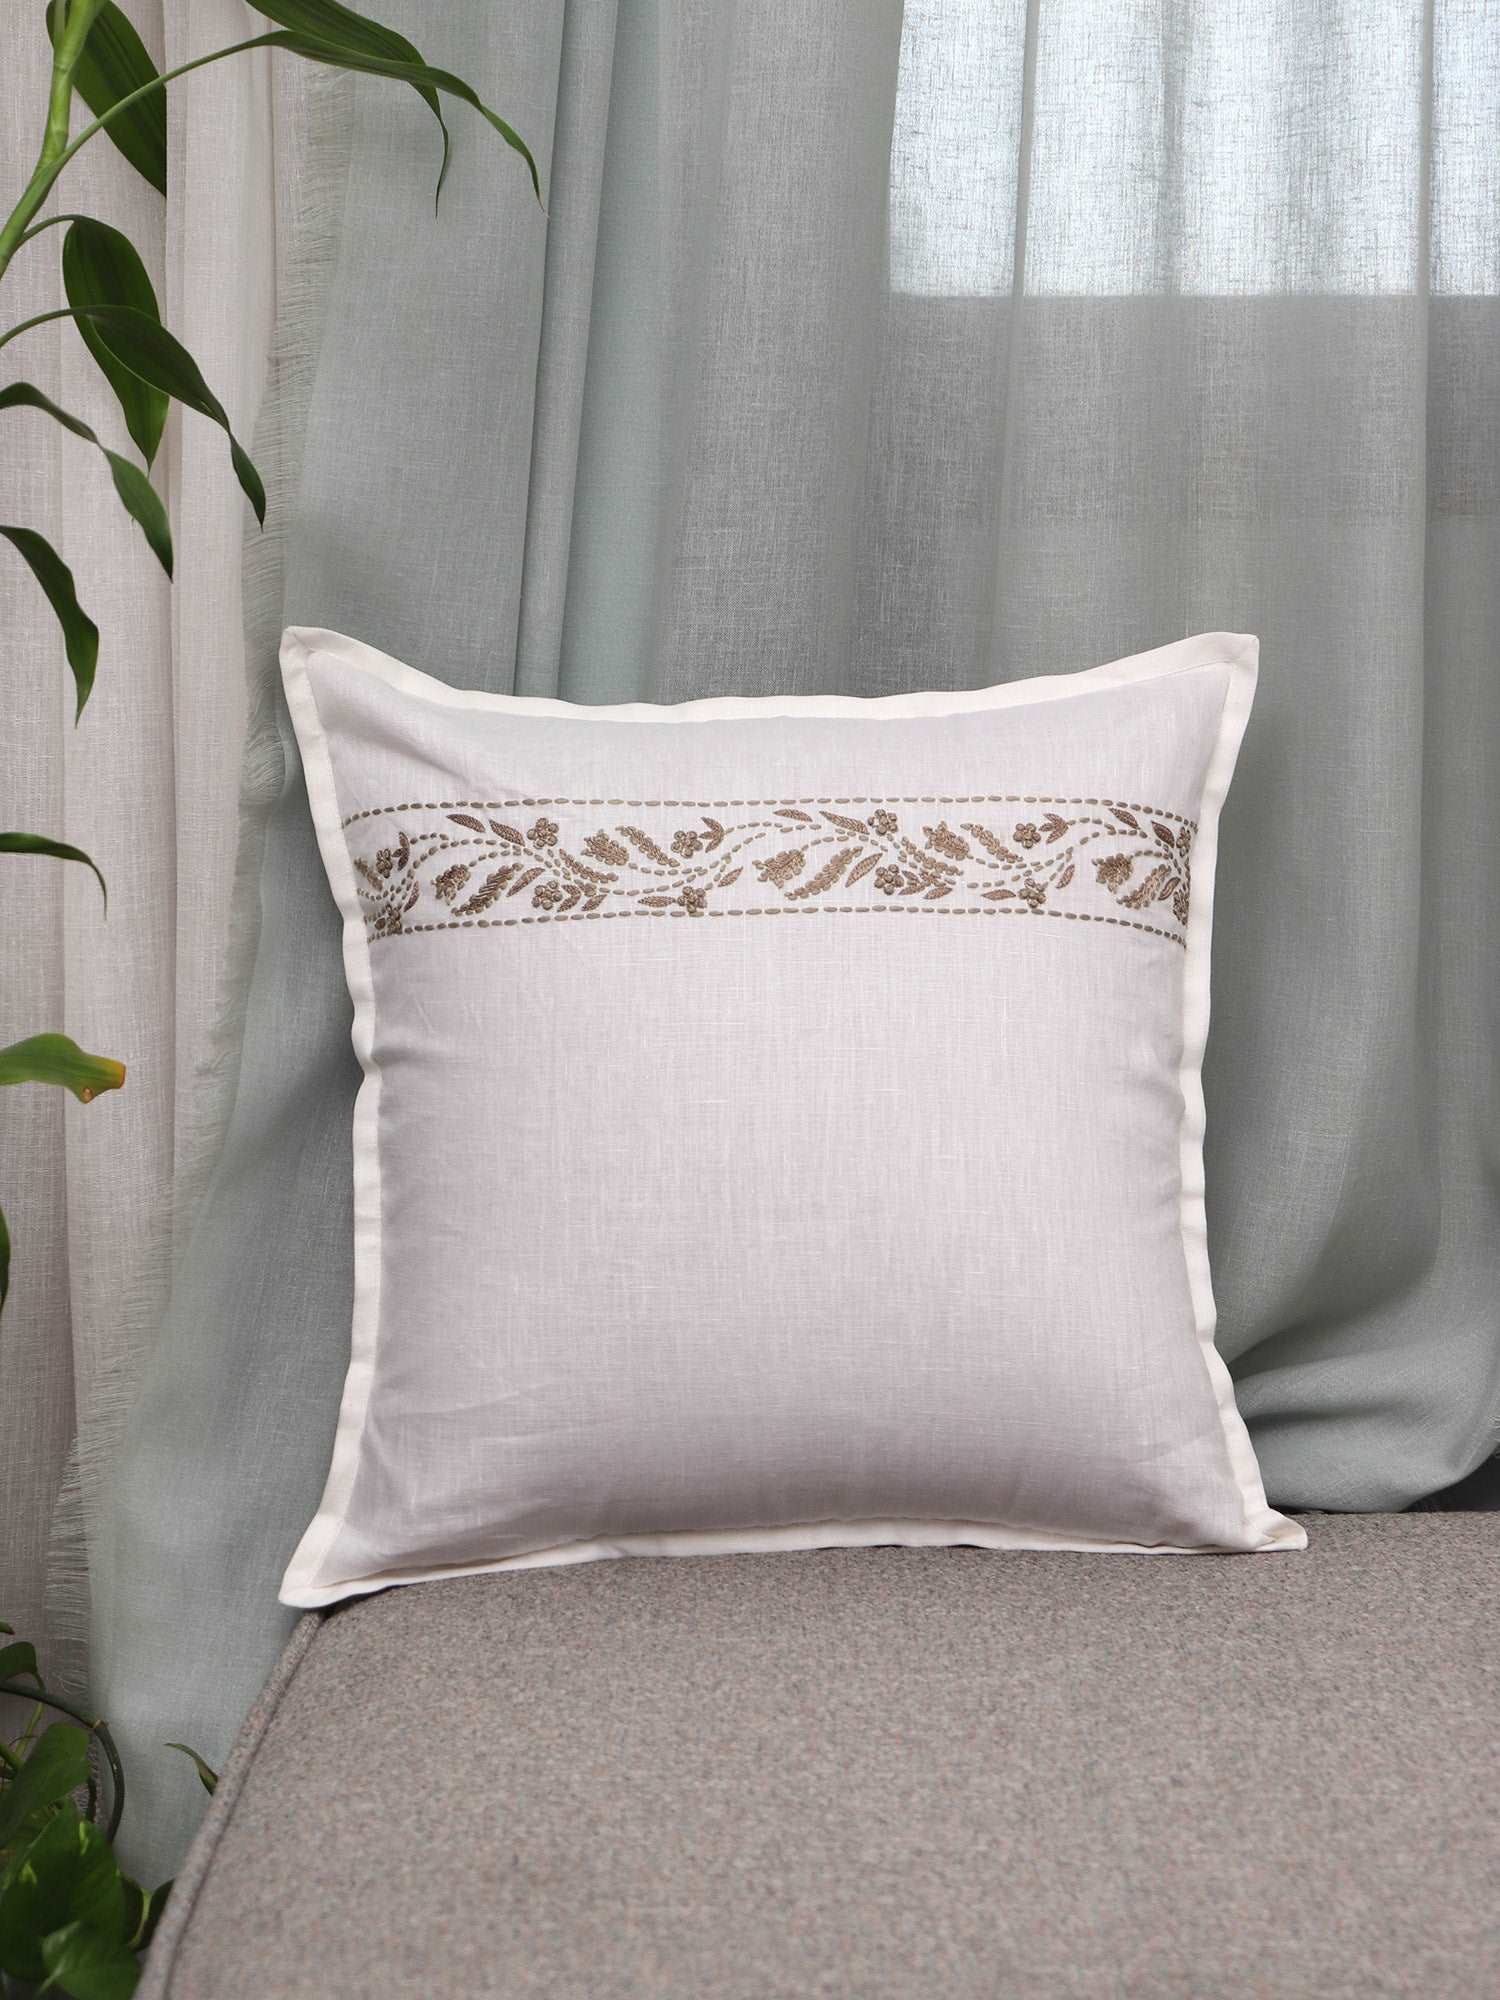 Cushion Cover Cotton Floral Embroidery White  - 16inches X 16inches